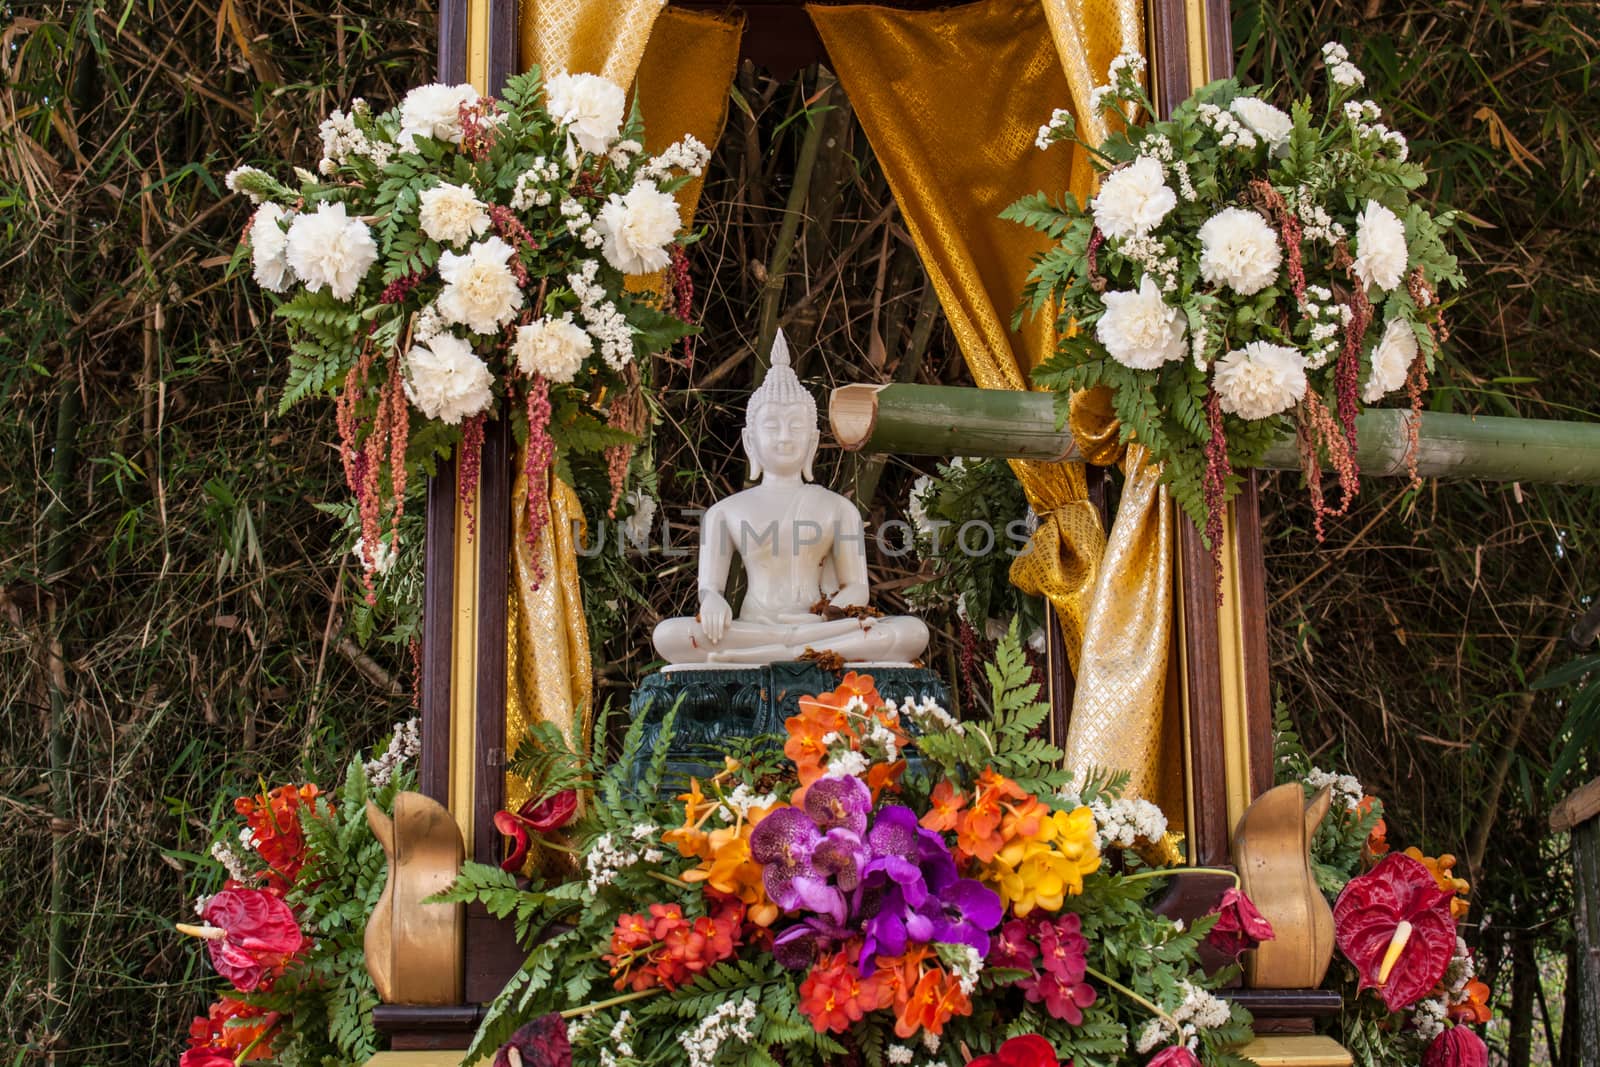 Buddha image and flowers in the annual Buddhist lent songkran festival by worrayuth